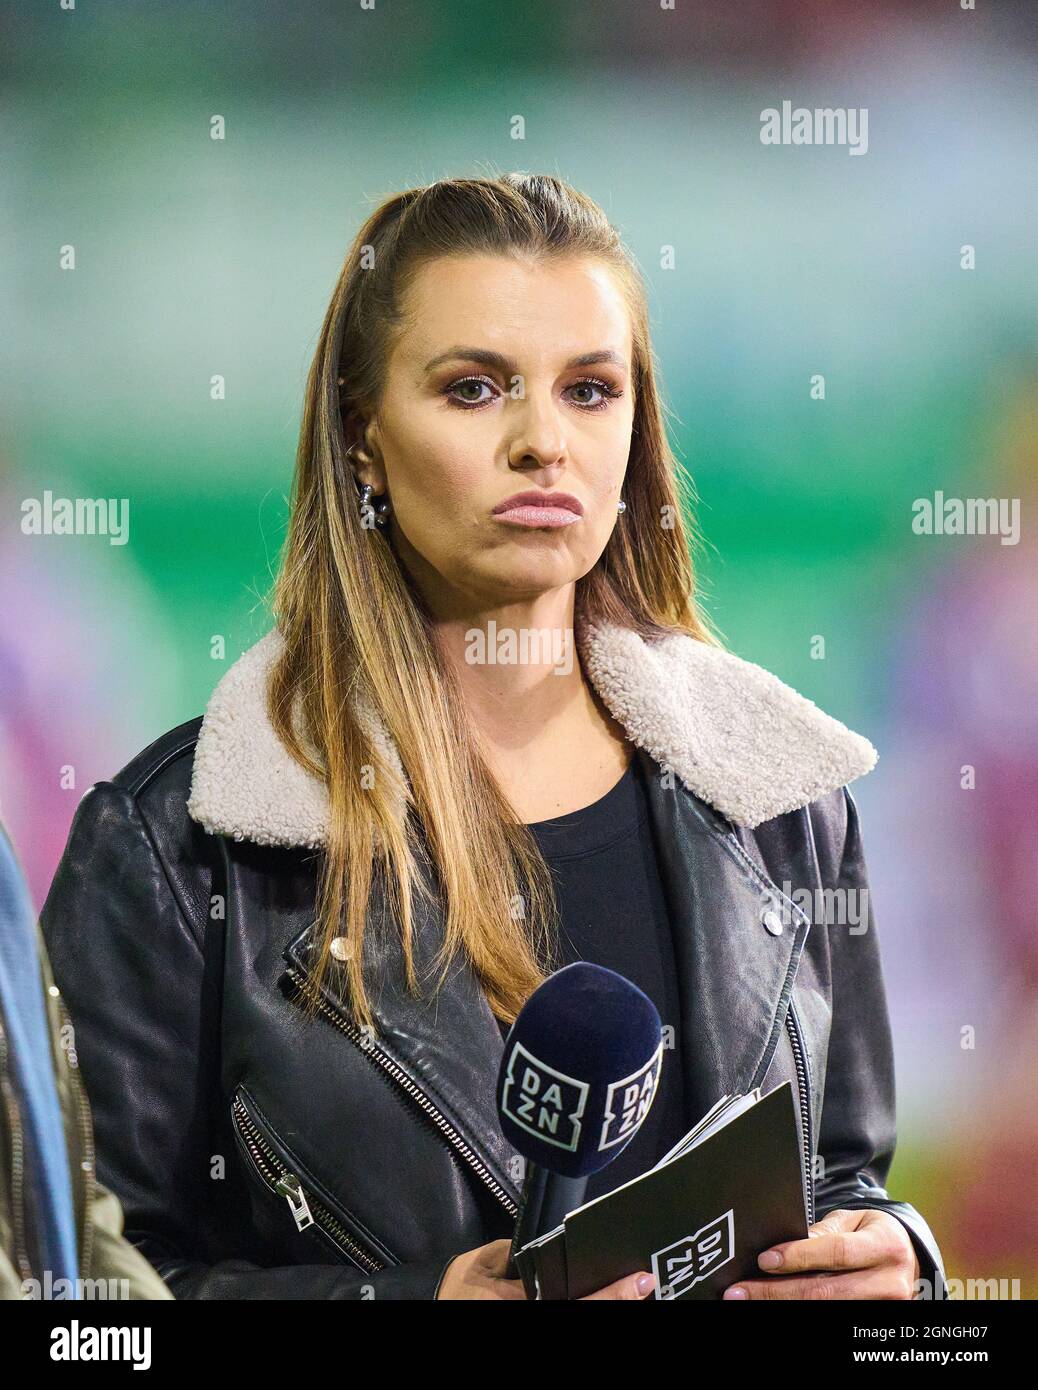 Laura WONTORRA, sports presenter, reporter, woman, moderator, TV, television,  in the match SpVgg GREUTHER FÜRTH - FC BAYERN MUENCHEN 1-3 1.German Football League on September 24, 2021 in Fuerth, Germany. Season 2021/2022, matchday 7, 1.Bundesliga, FCB, München, 7.Spieltag. © Peter Schatz / Alamy Live News    - DFL REGULATIONS PROHIBIT ANY USE OF PHOTOGRAPHS as IMAGE SEQUENCES and/or QUASI-VIDEO - Stock Photo